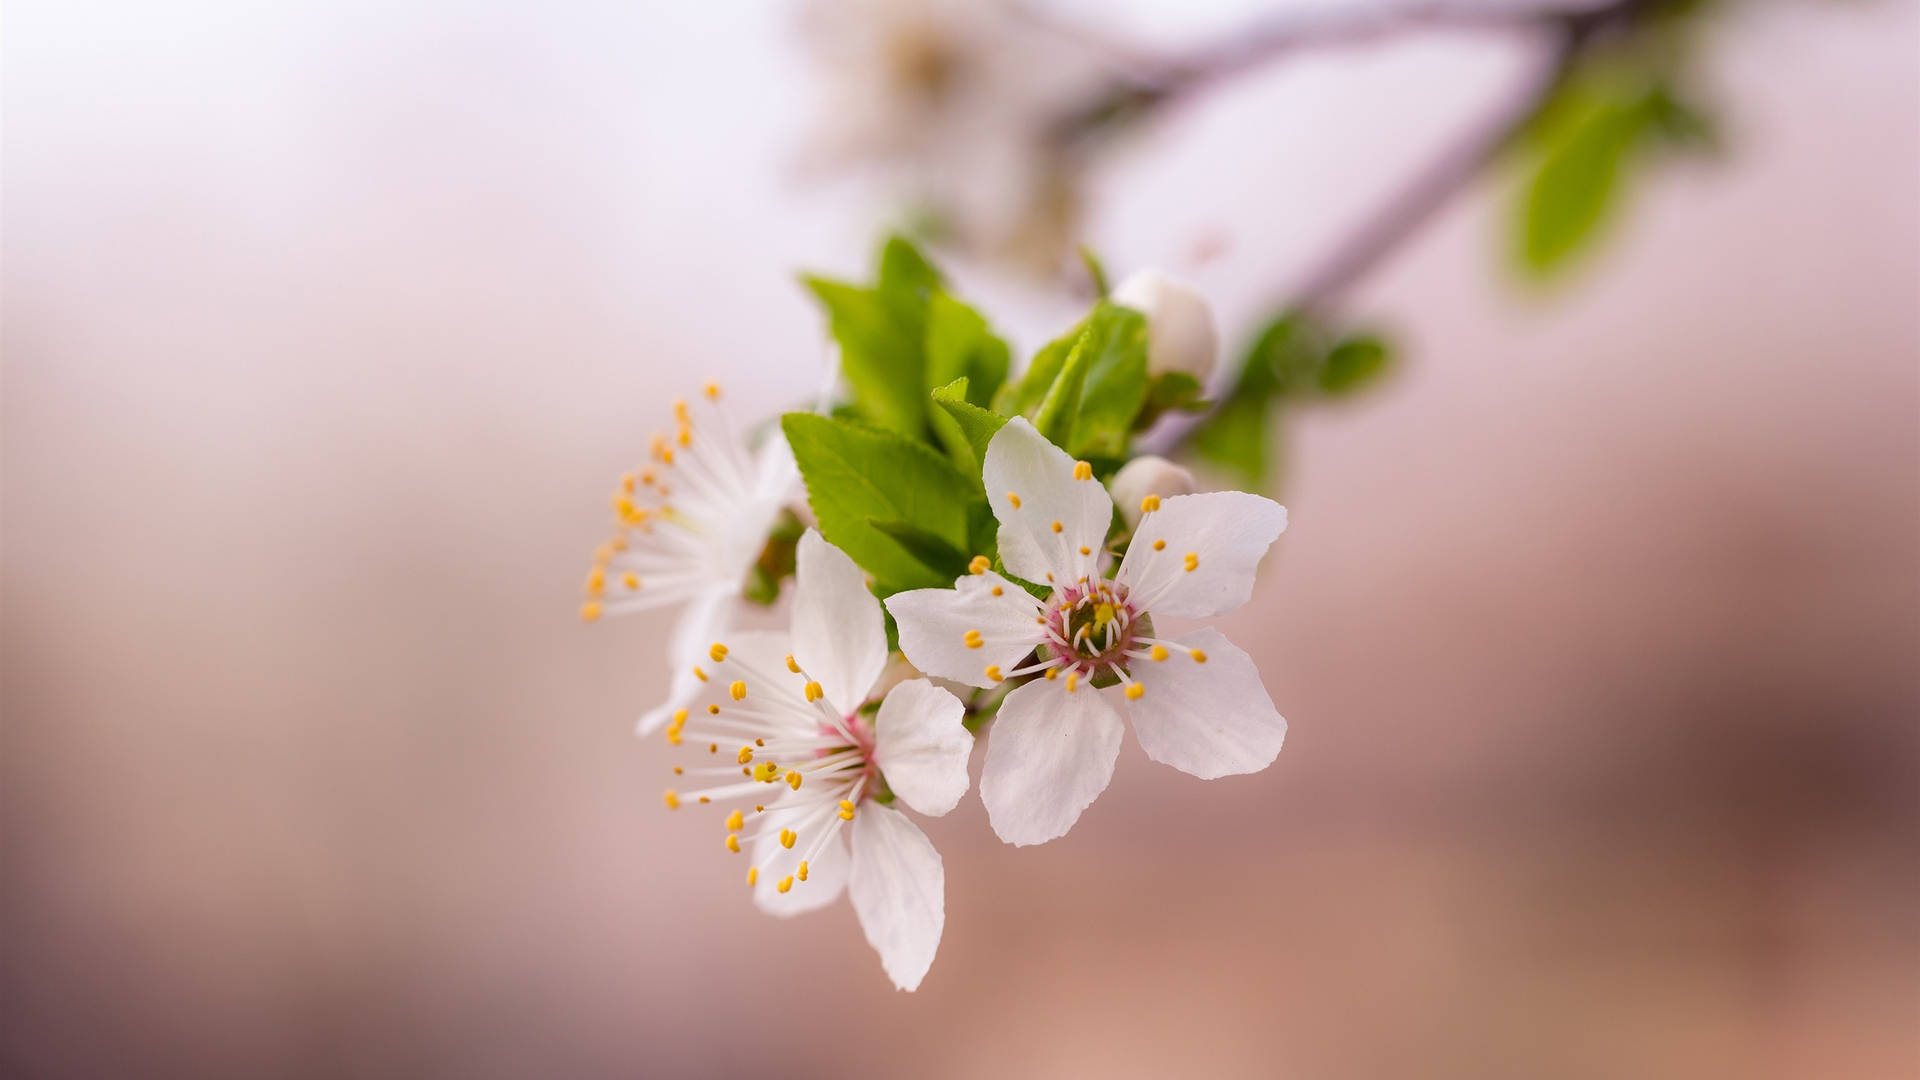 White Spring Flowers Focus Photography Wallpaper